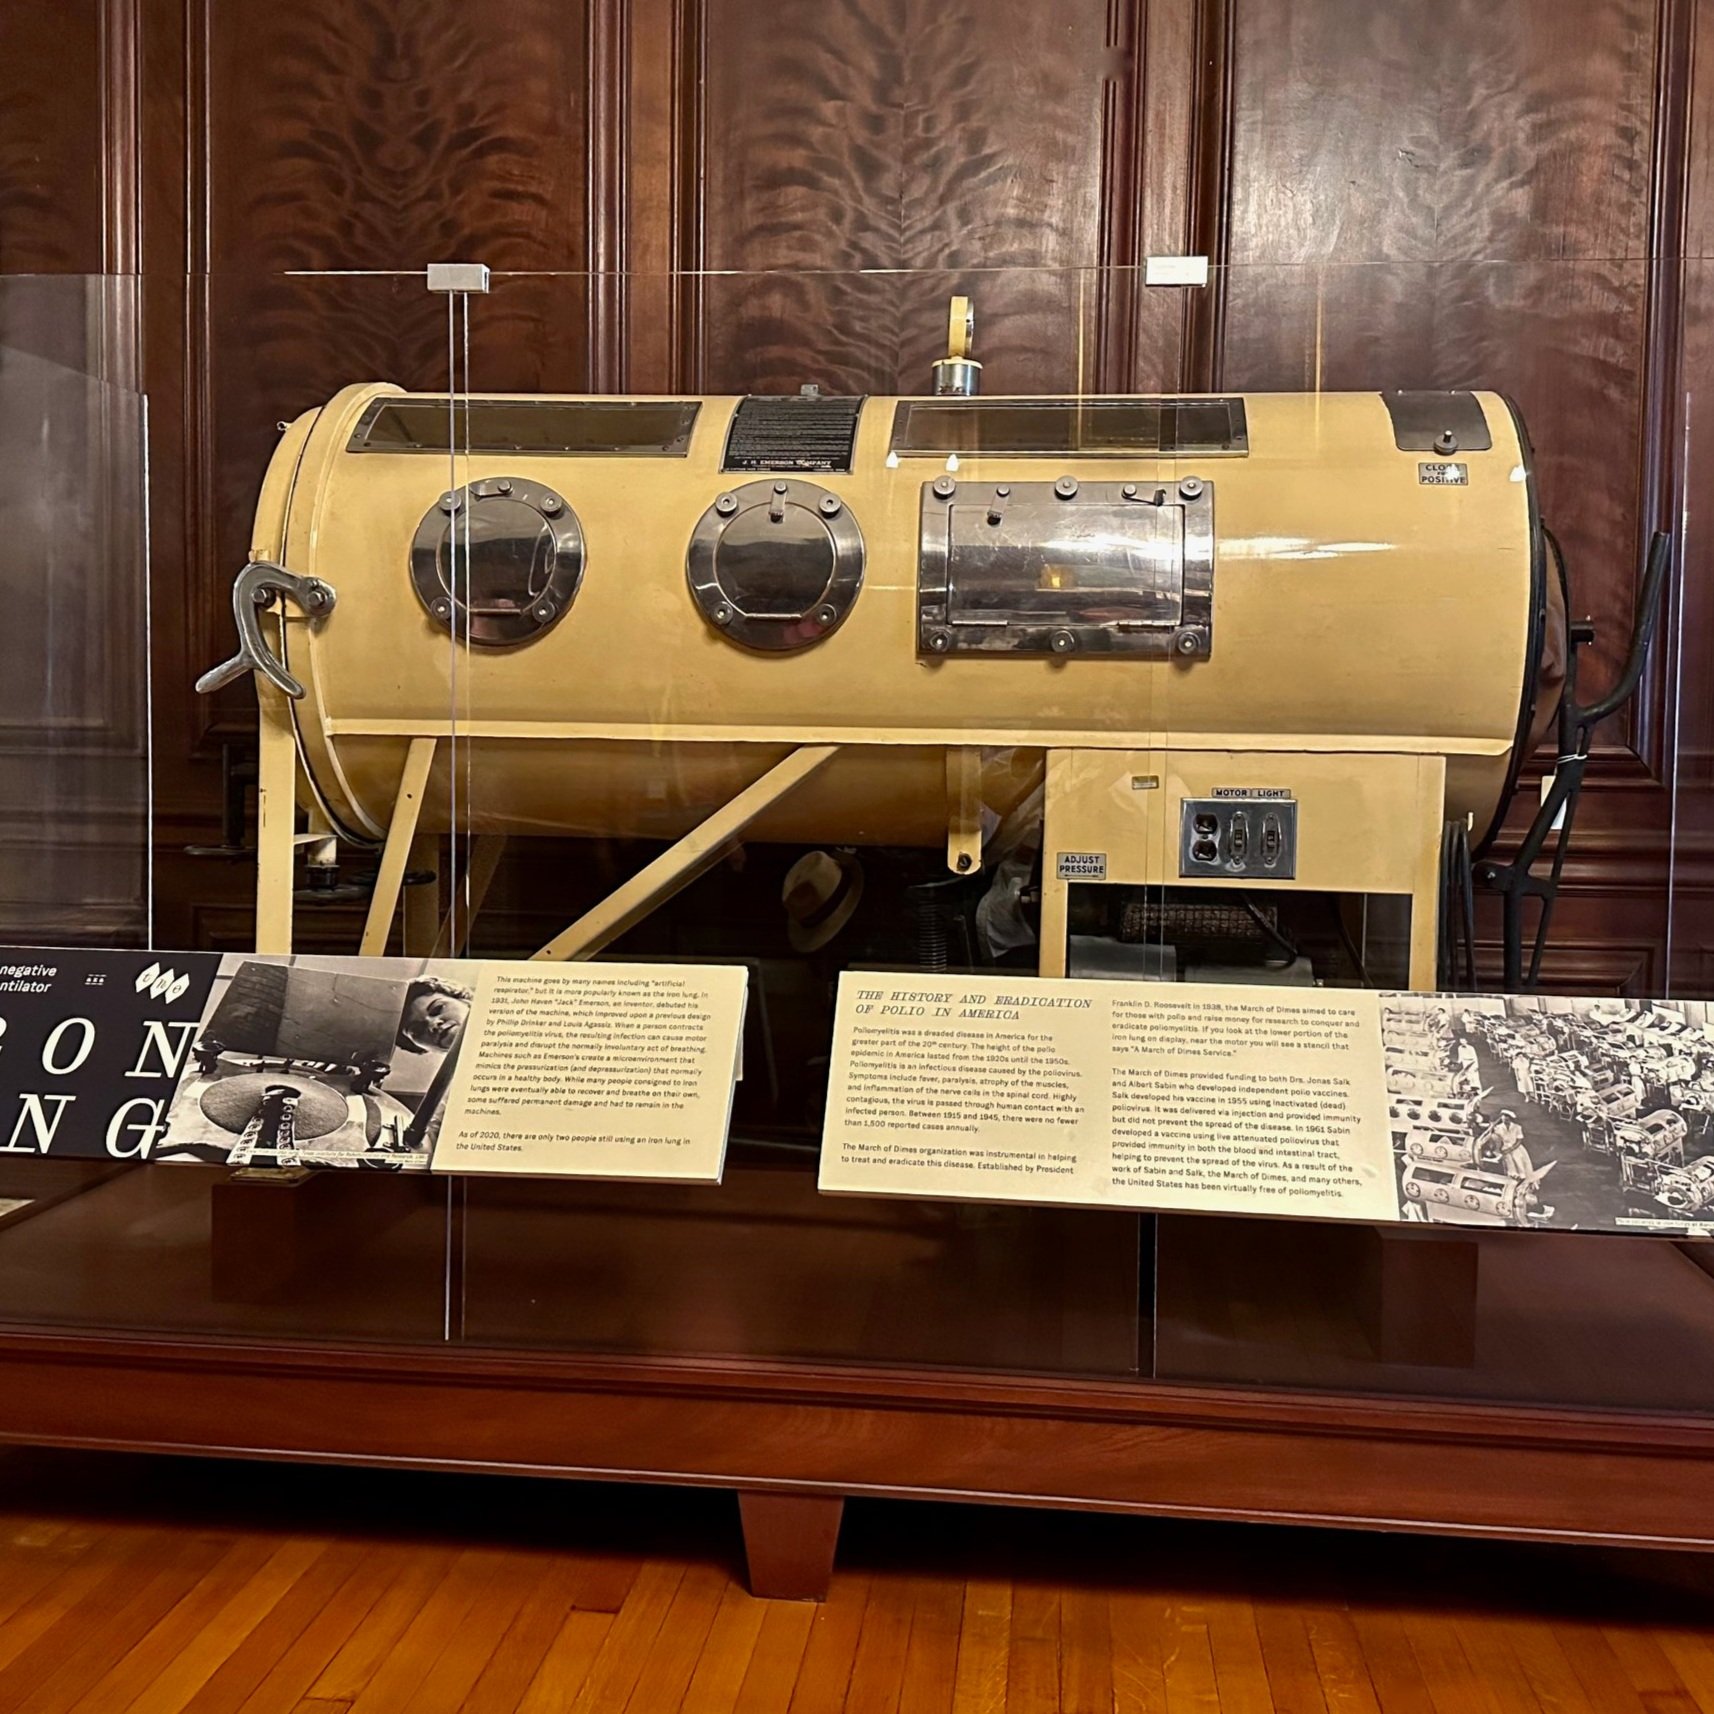 Iron Lung at the Mutter Museum